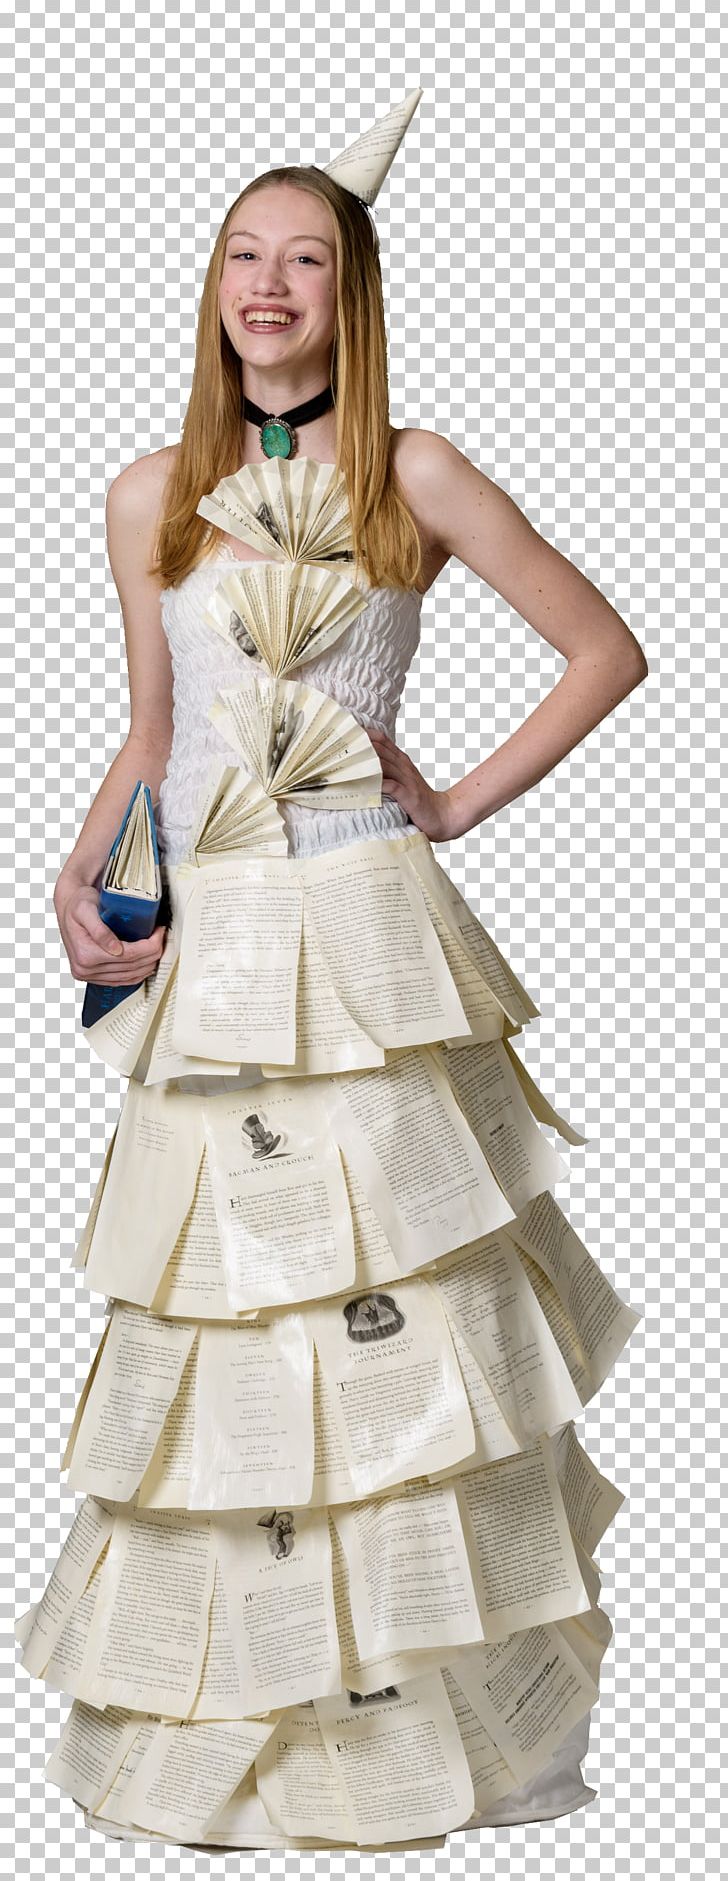 Vera Wang Fashion Show Model Designer PNG, Clipart, Atkinson, Bridal Party Dress, Celebrities, Cocktail Dress, Costume Free PNG Download